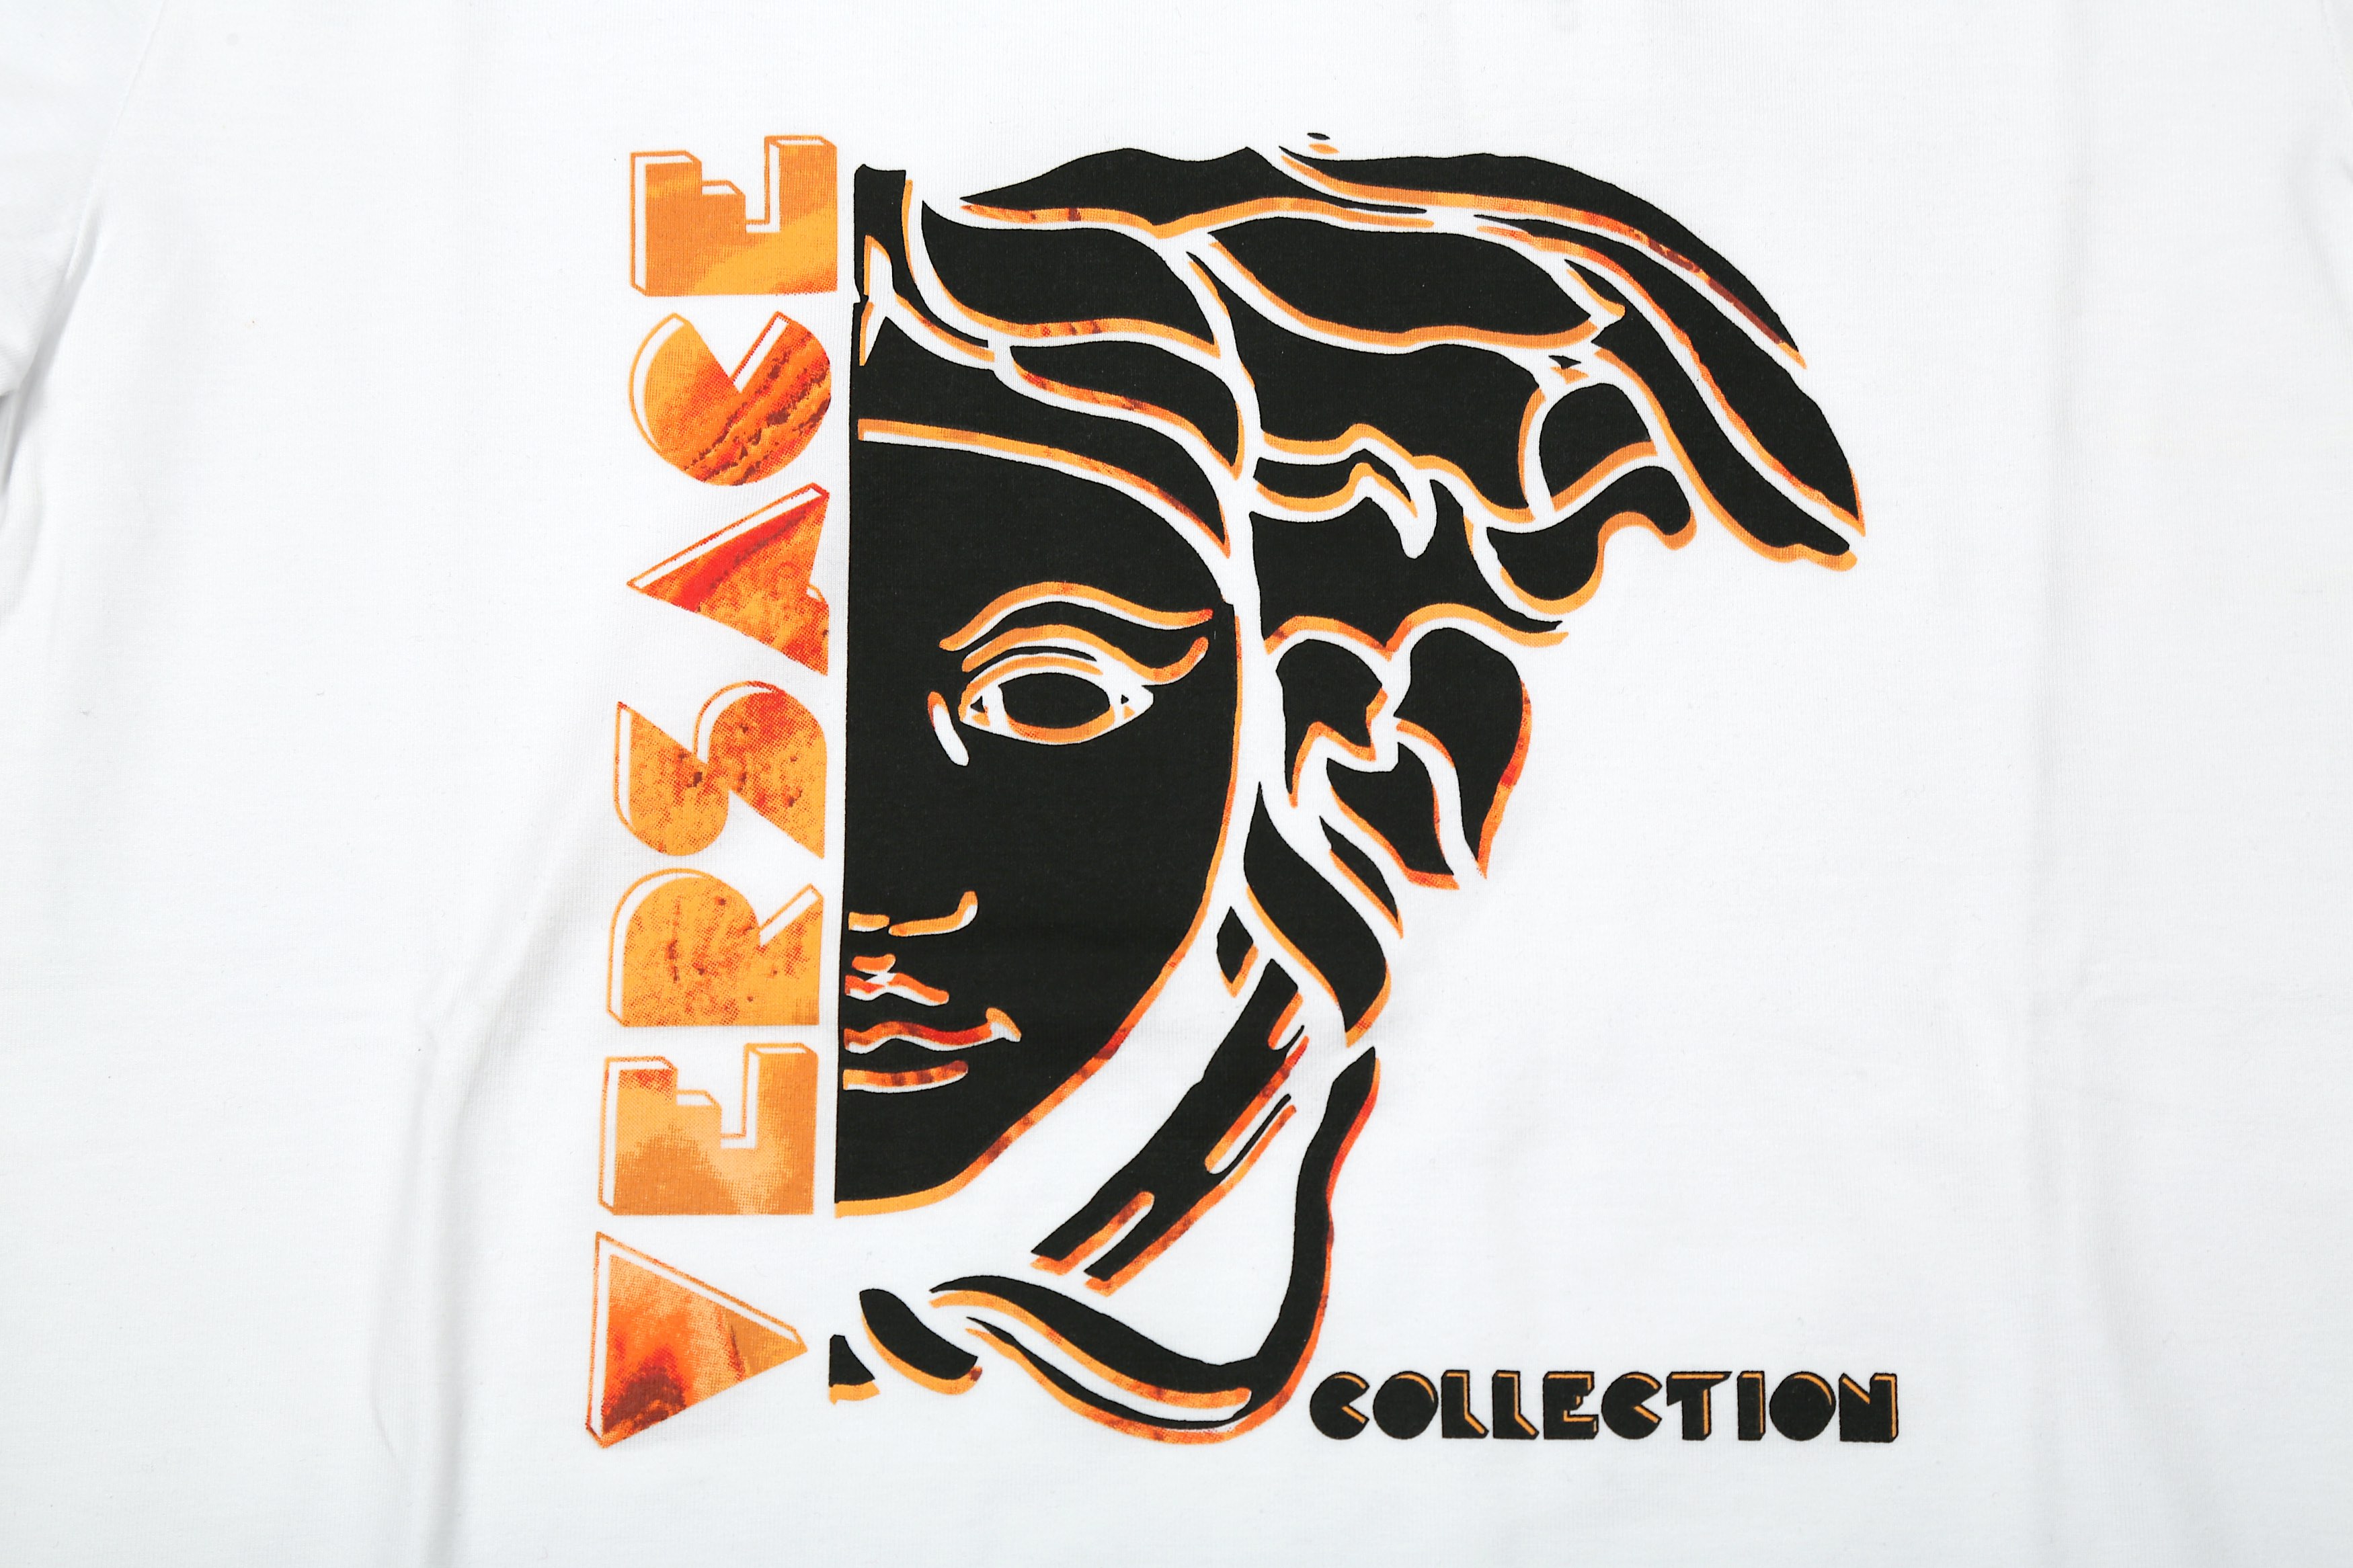 Versace Collection White Medusa Logo T-Shirt - Size S - Image 3 of 4